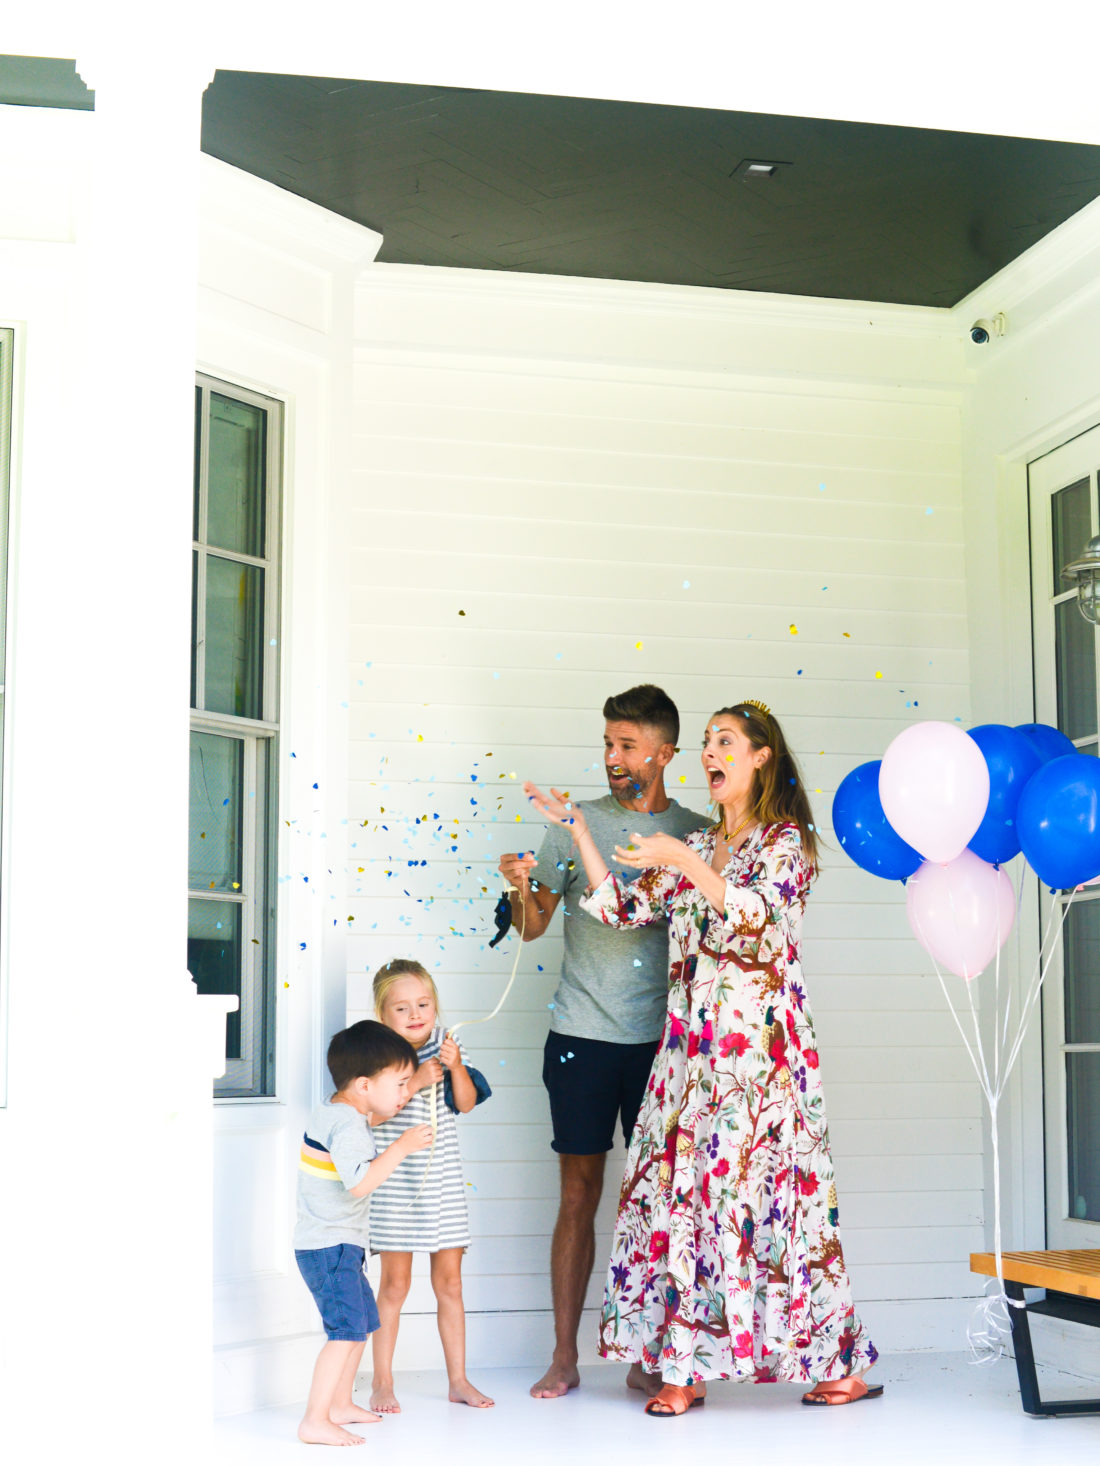 Eva Amurri Martino and husband Kyle find out the gender of their third child with their kids Marlowe and Major